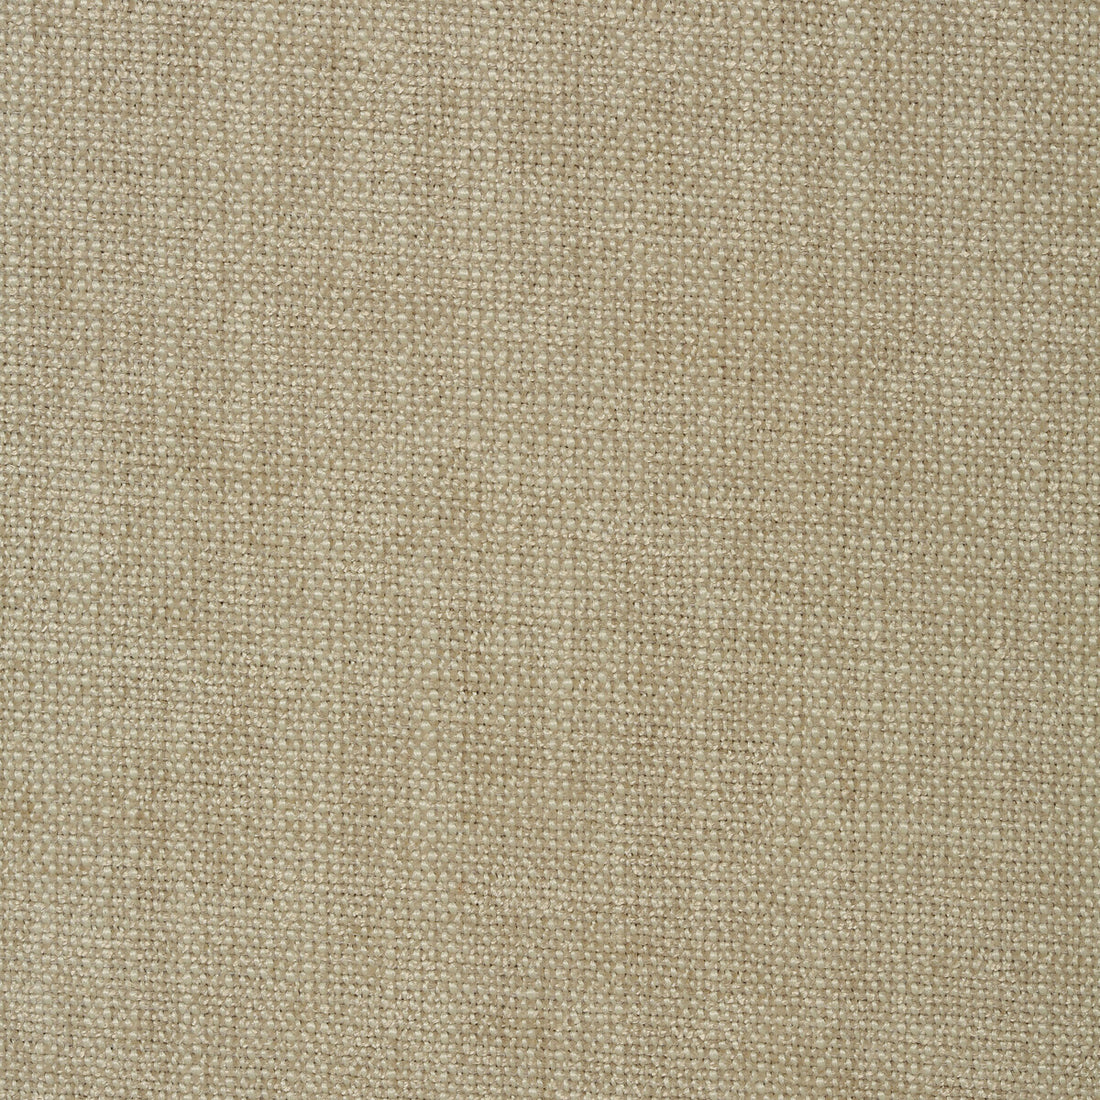 Kravet Smart fabric in 35113-106 color - pattern 35113.106.0 - by Kravet Smart in the Performance Crypton Home collection